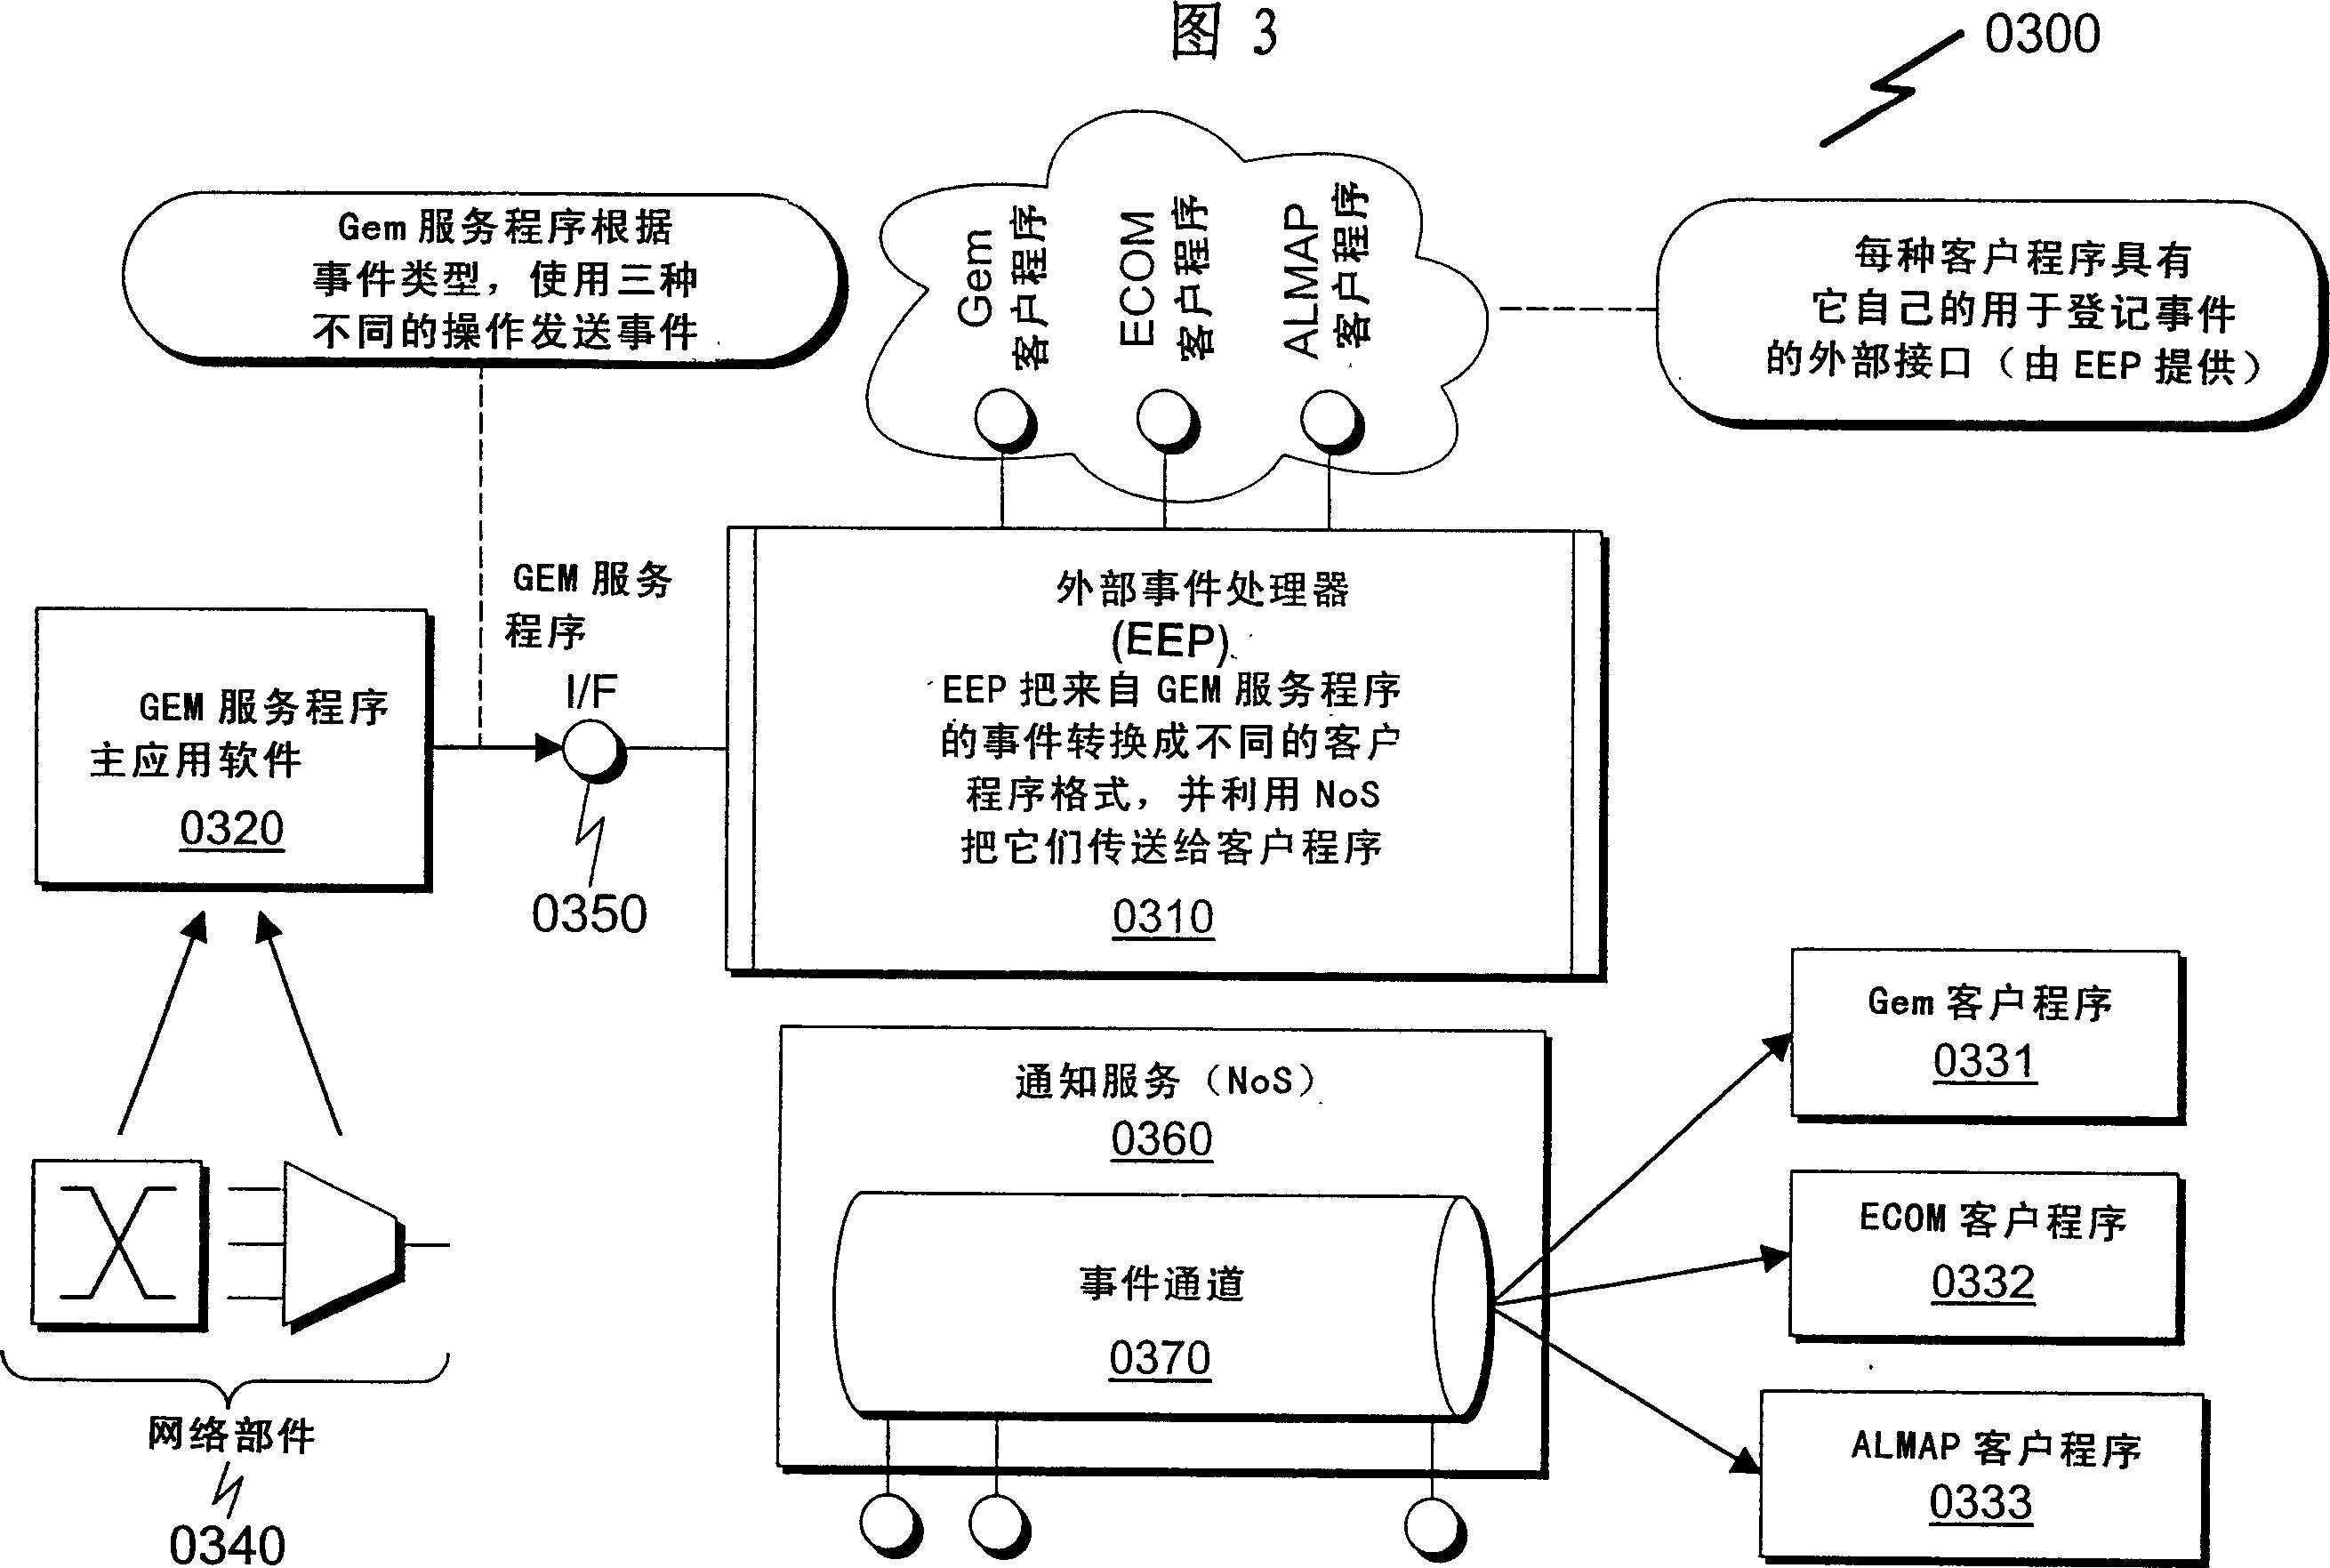 External event processor system and method